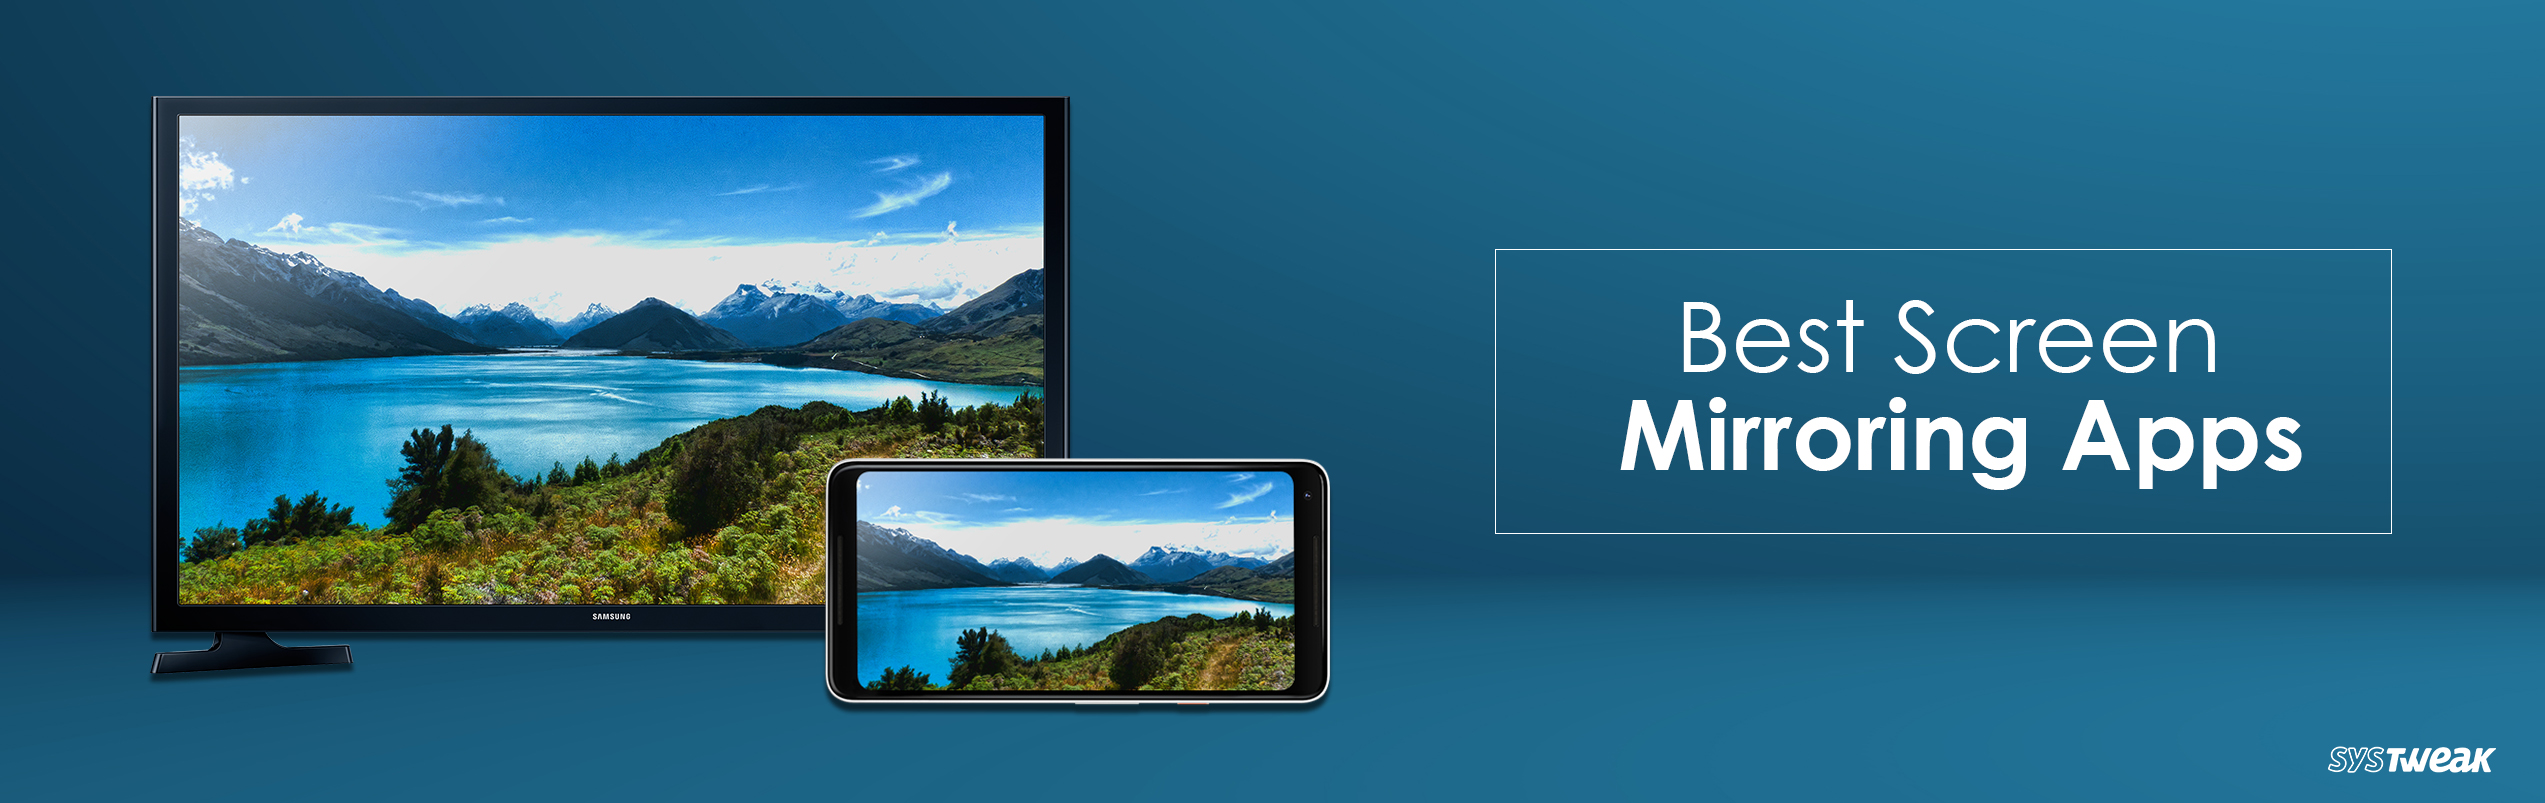 best screen mirroring app for iphone to windows 10